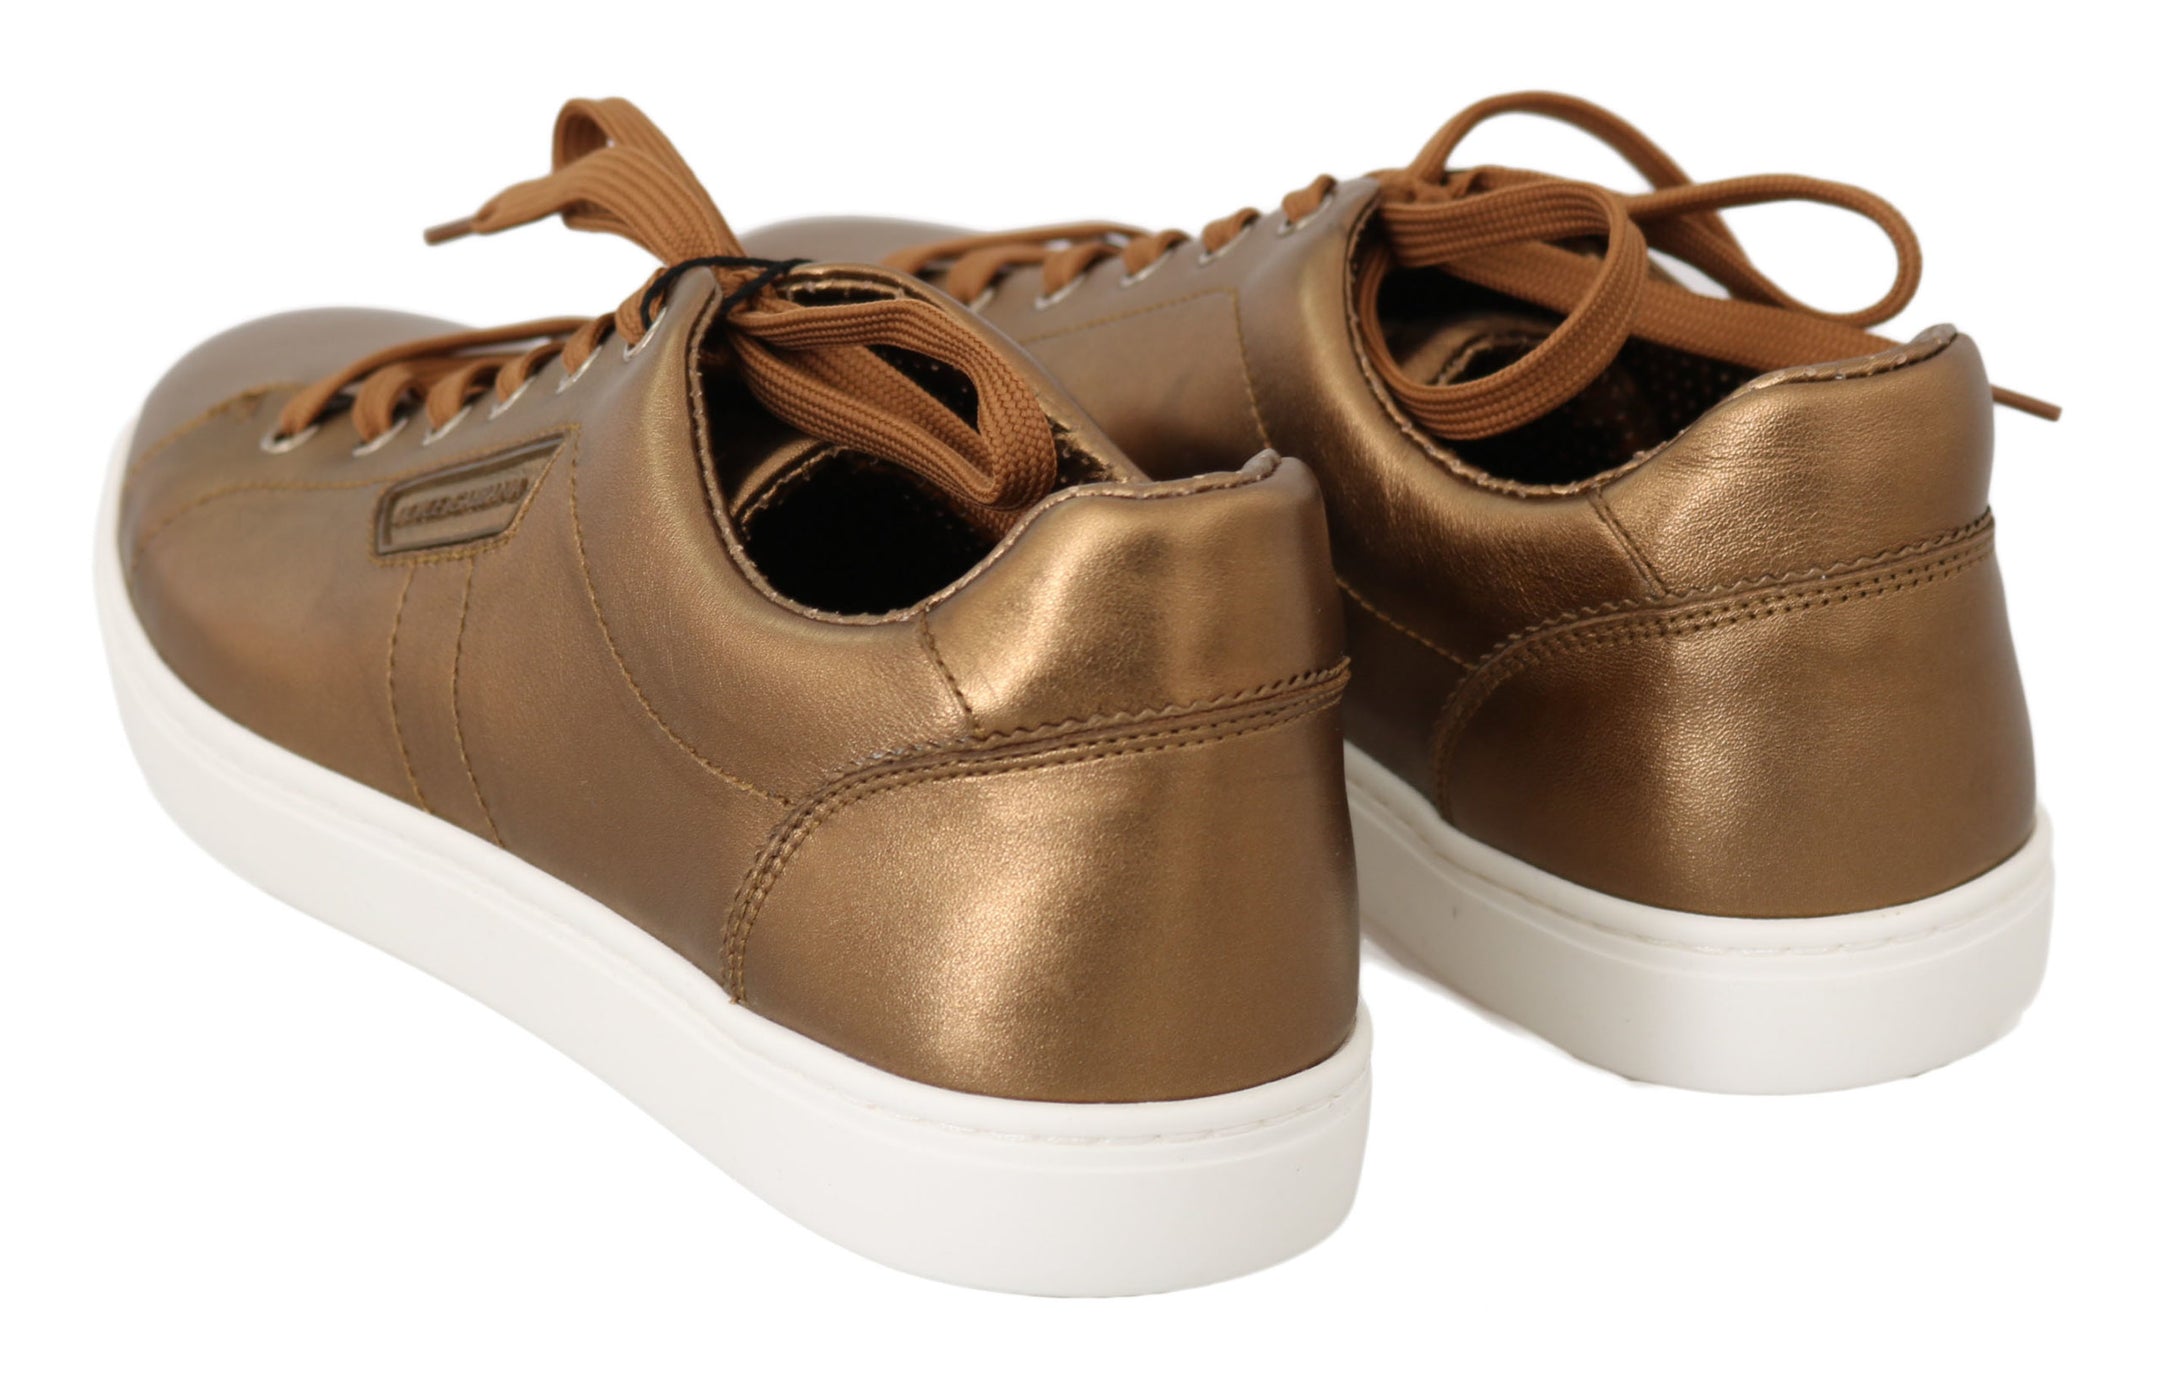 Buy Golden Metallic Leather Sneakers by Dolce & Gabbana